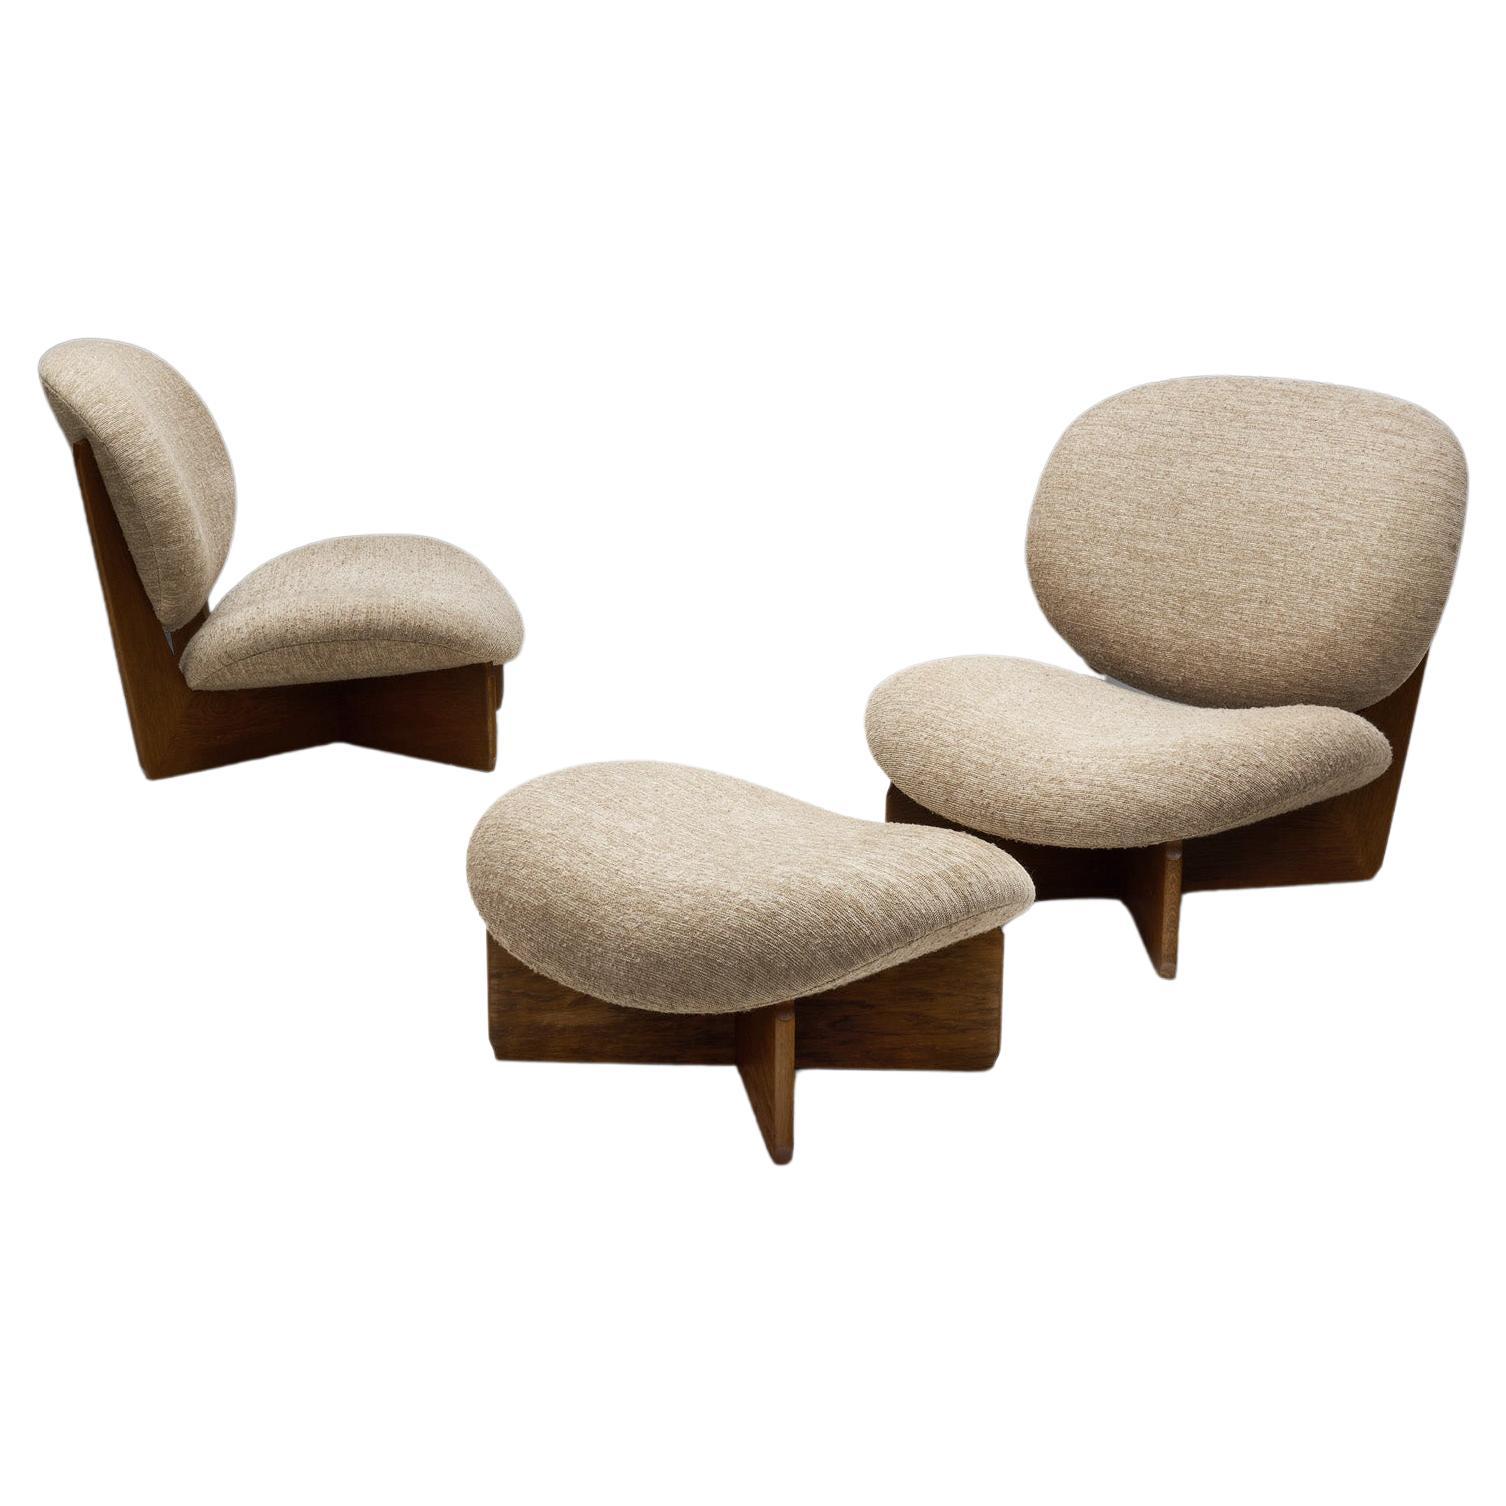 Set of Mid-Century Modern Lounge Chairs and Footstool, Europe Late 20th Century For Sale